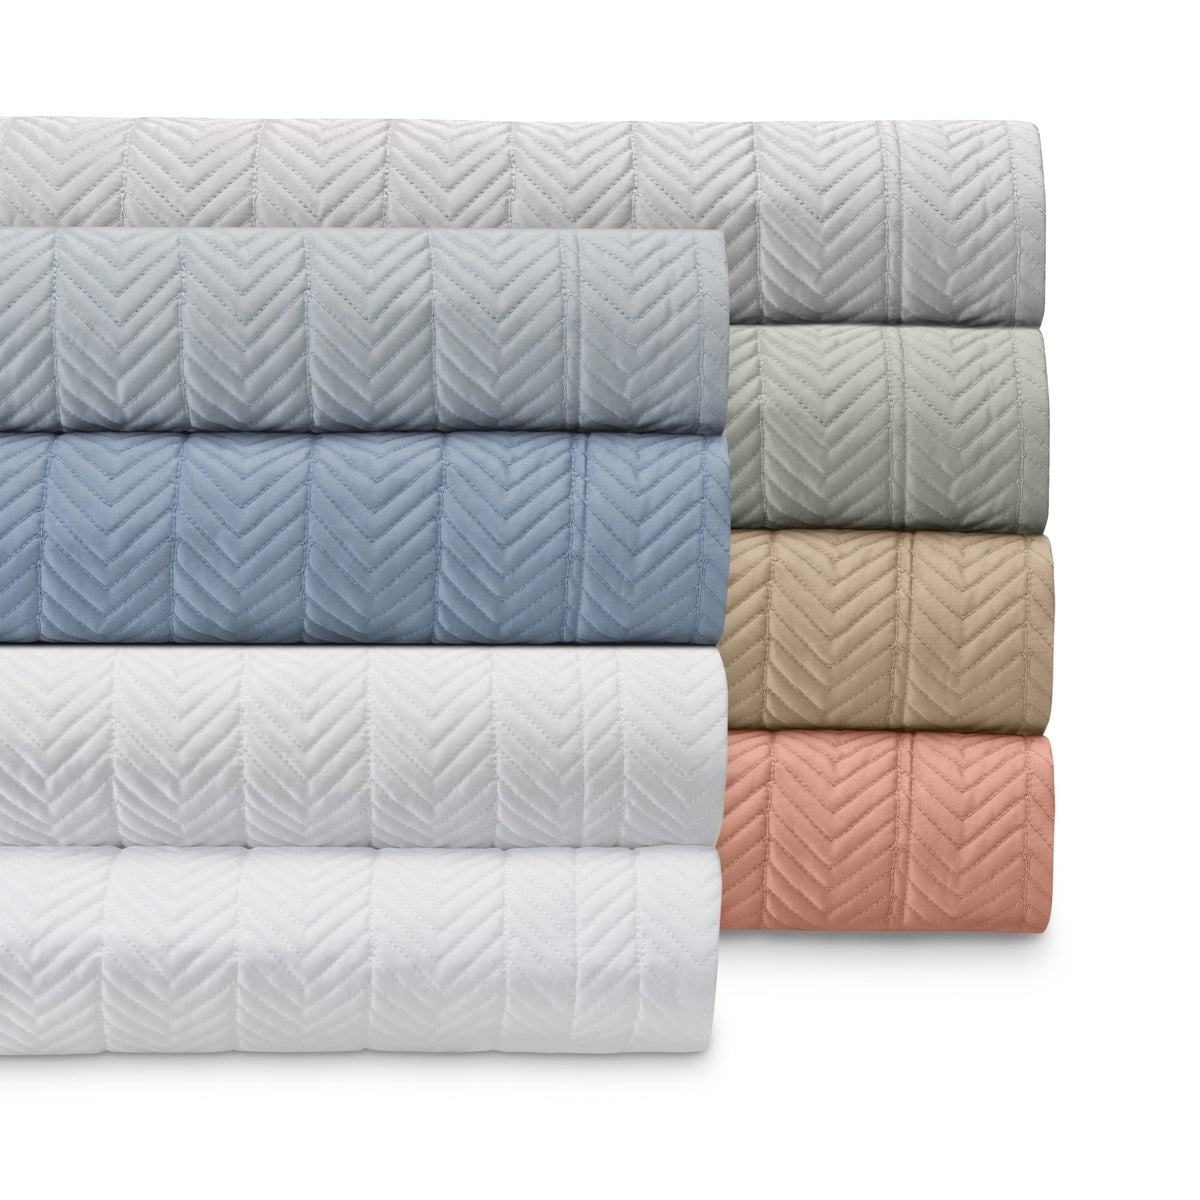 Stack of Matouk Netto Bedding in All Colors